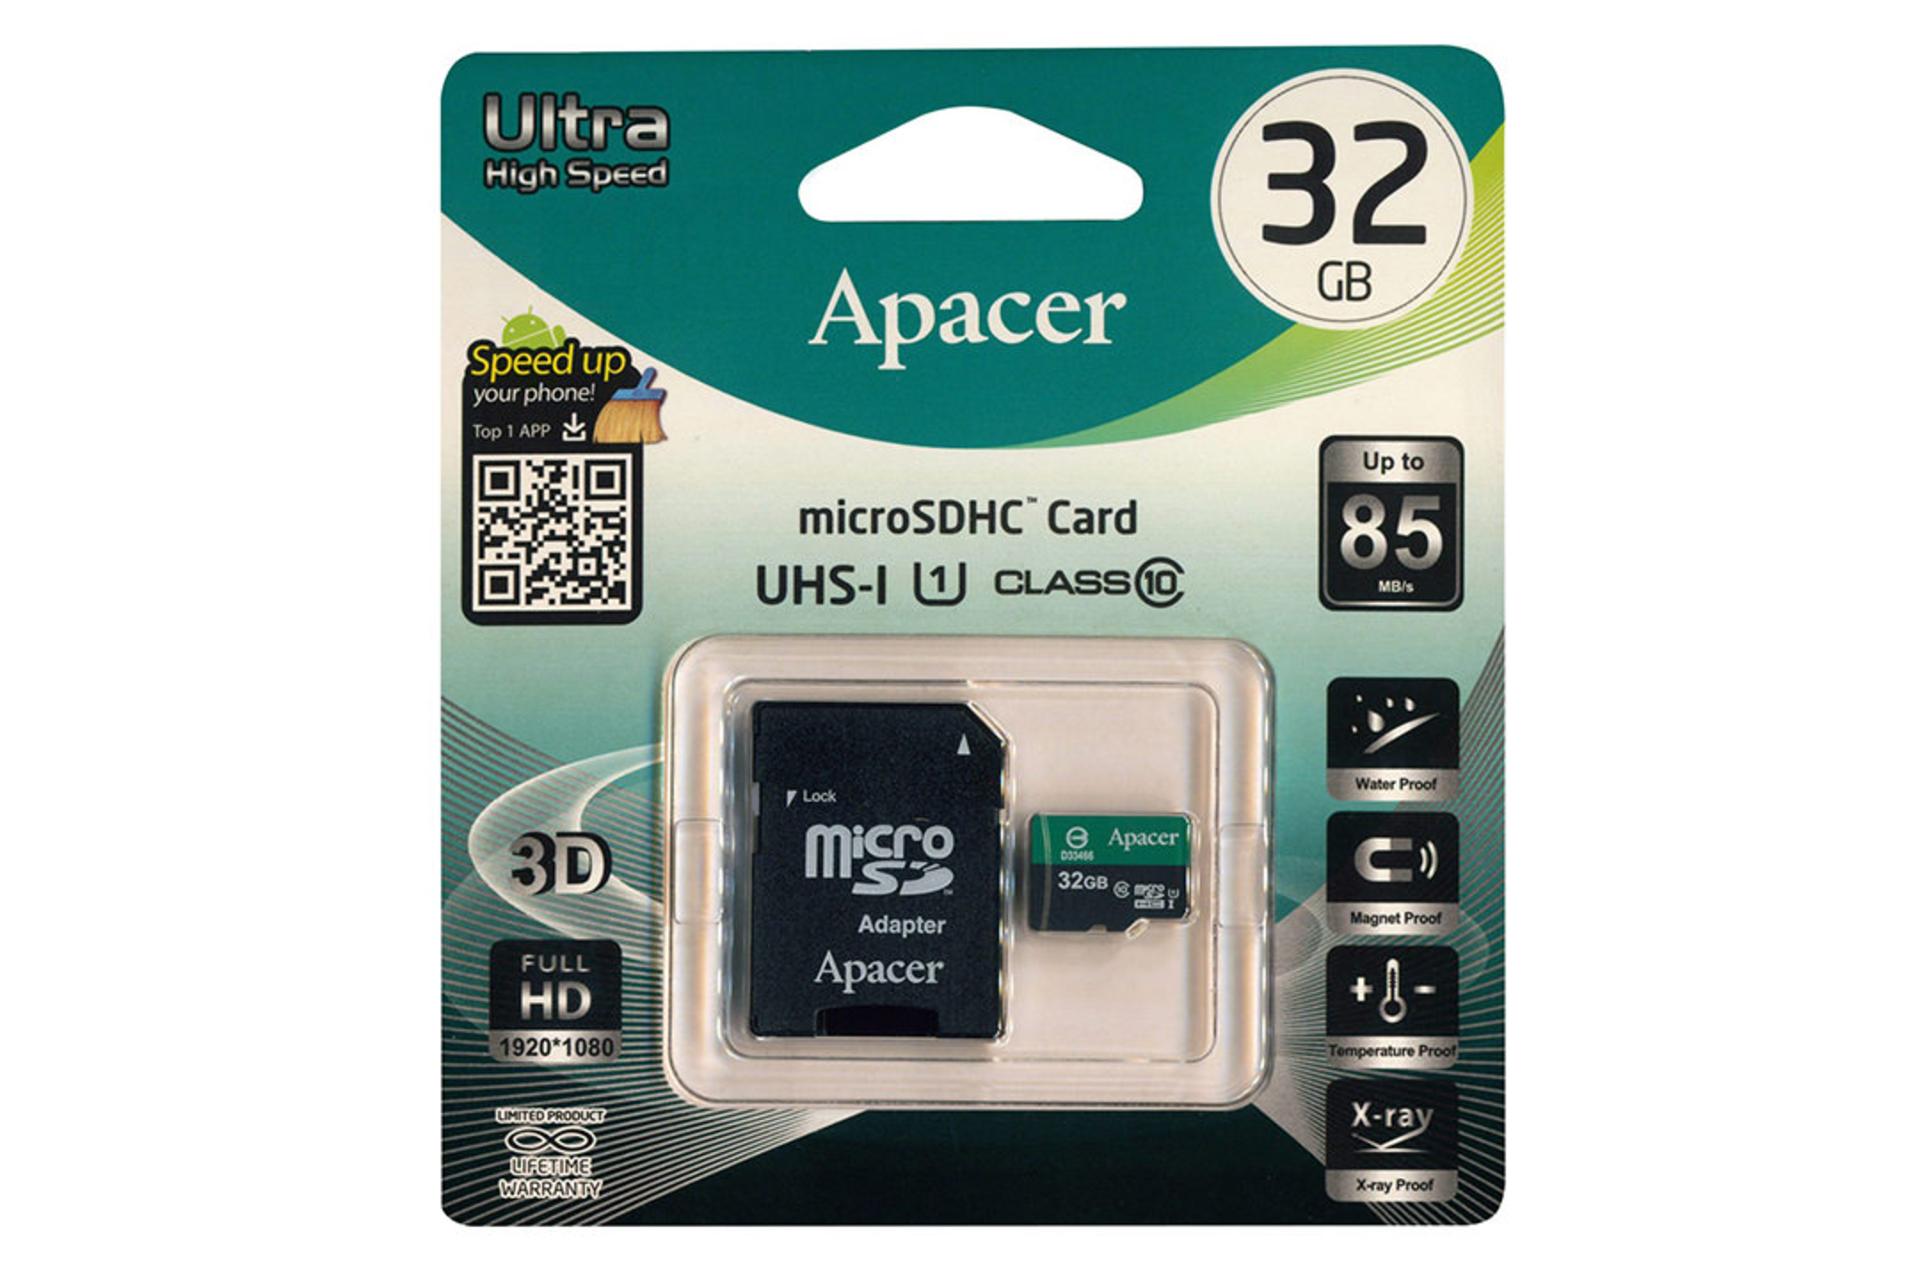 Apacer Color Ultra High Speed microSDHC Class 10 UHS-I U1 32GB